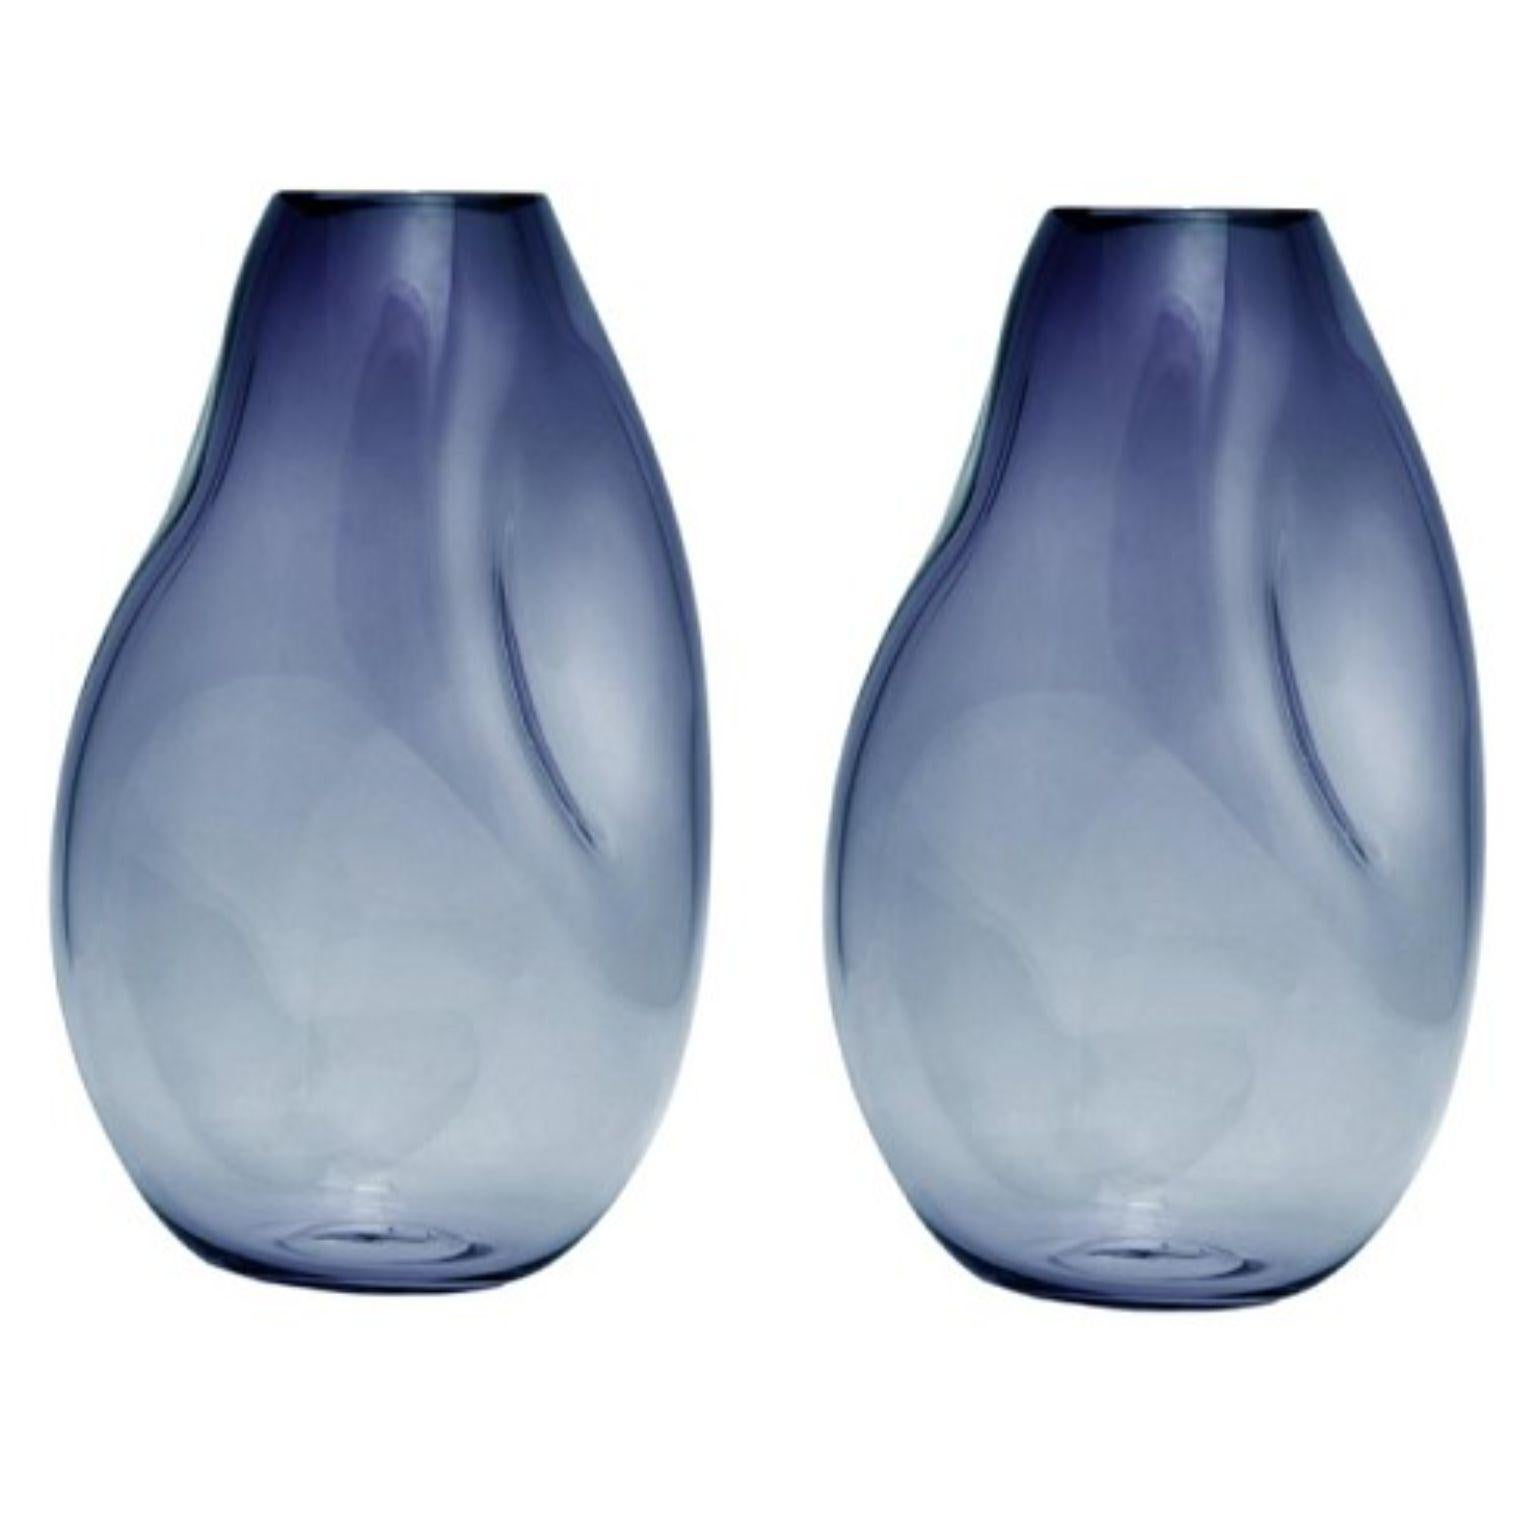 Set of 2 Supernova IV Steel Blue L Vases by Eloa.
No UL listed 
Material: Glass
Dimensions: D15 x W17 x H41 cm
Also Available in different colours and dimensions.

SUPERNOVA is a collection of vases and bowls that, though they don‘t